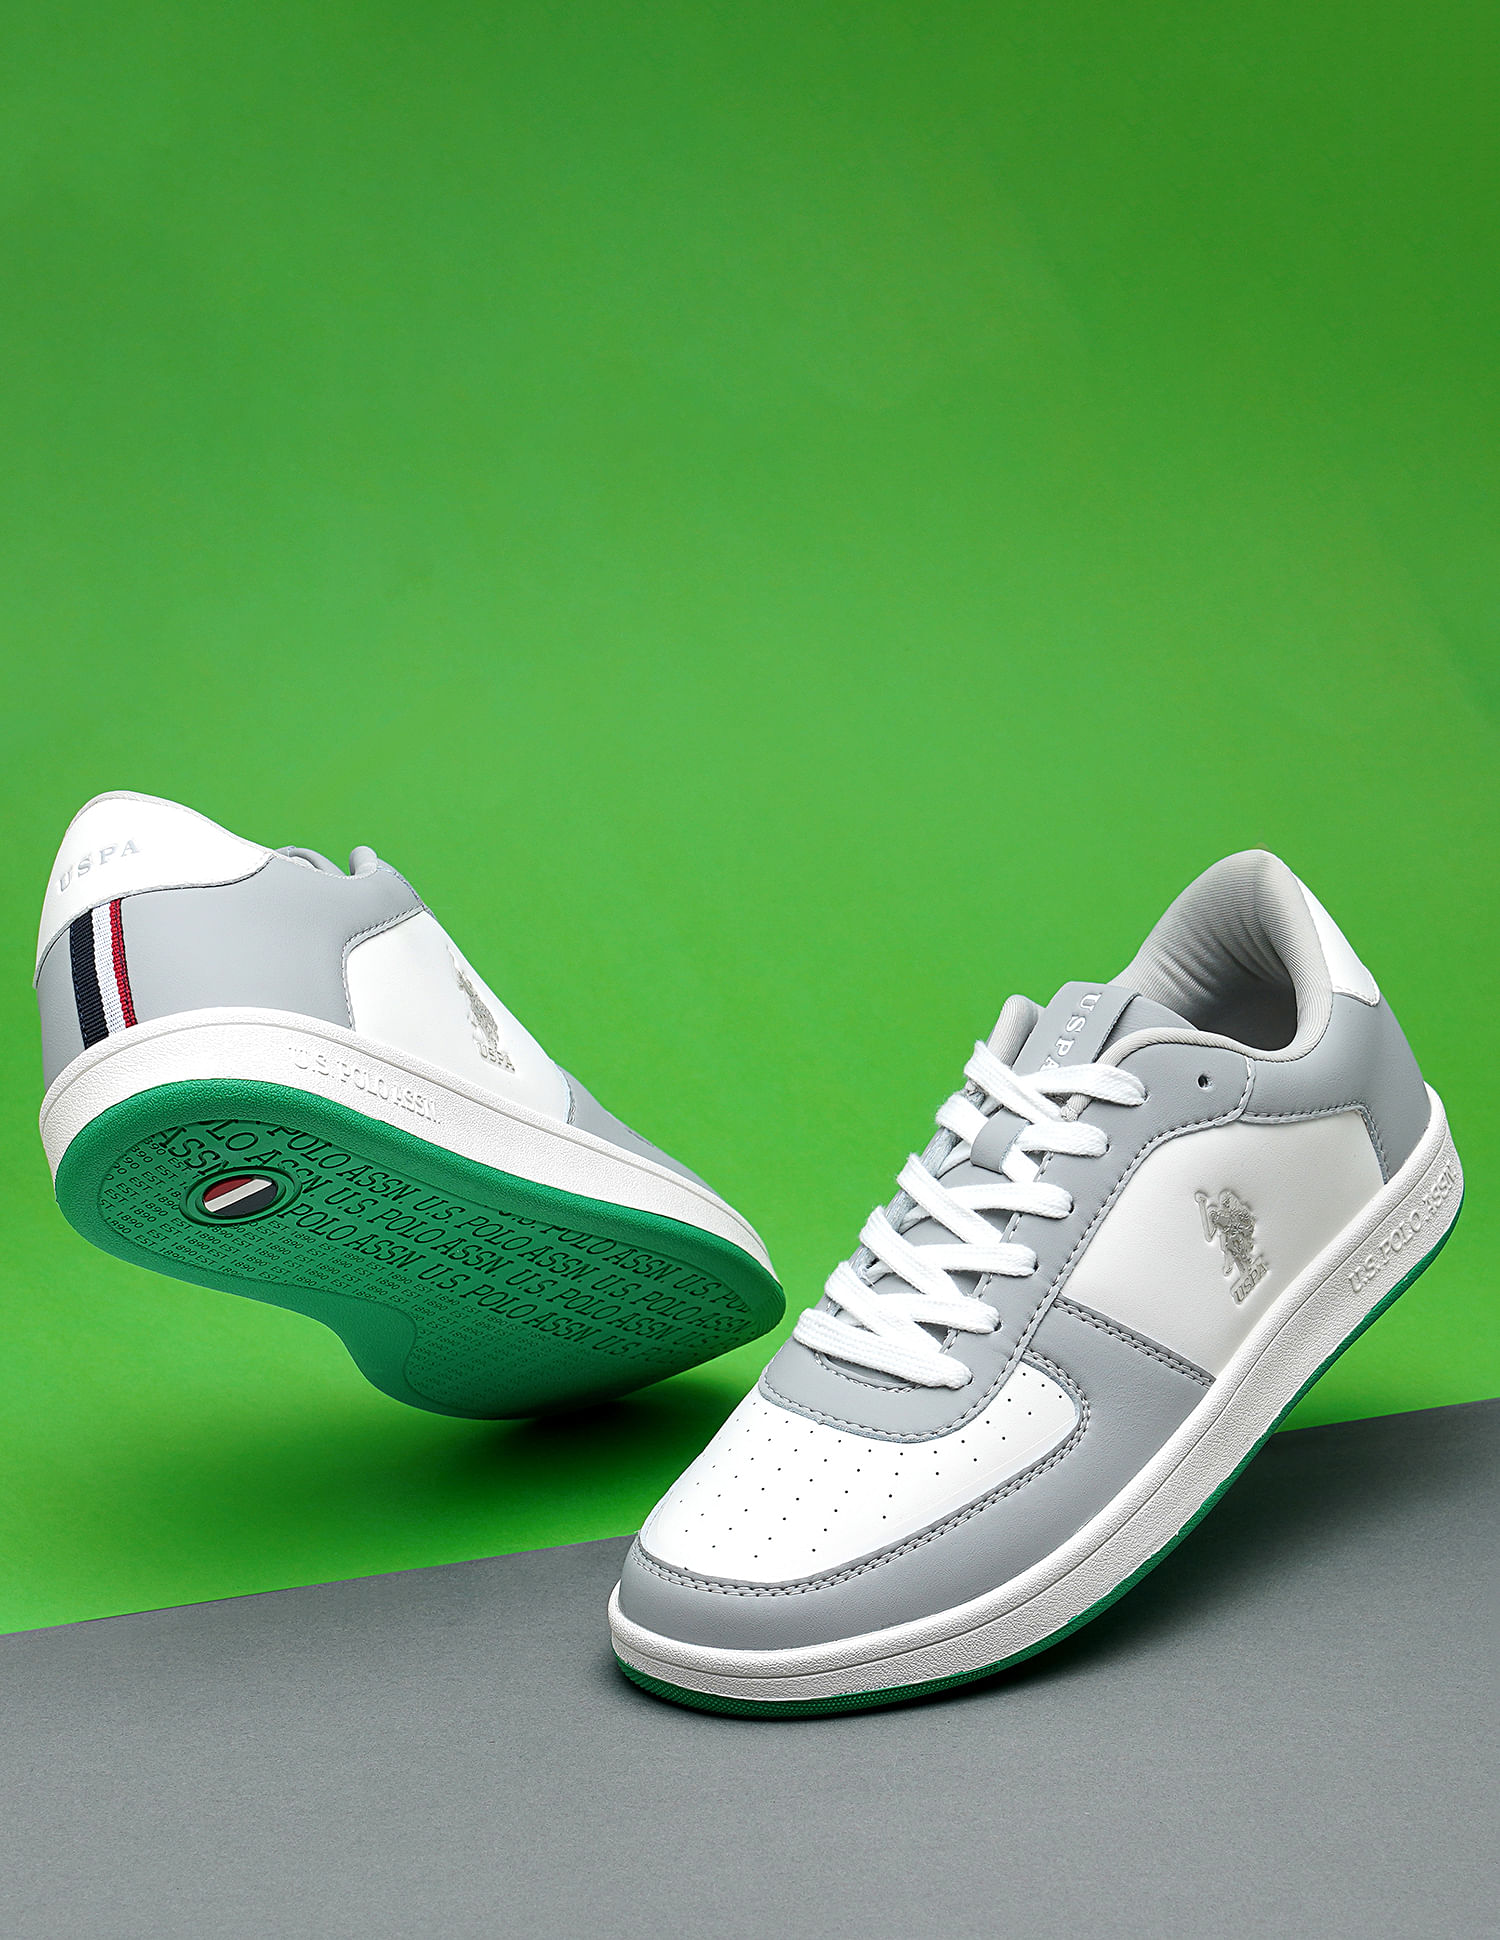 Share more than 127 us polo shoes sneakers